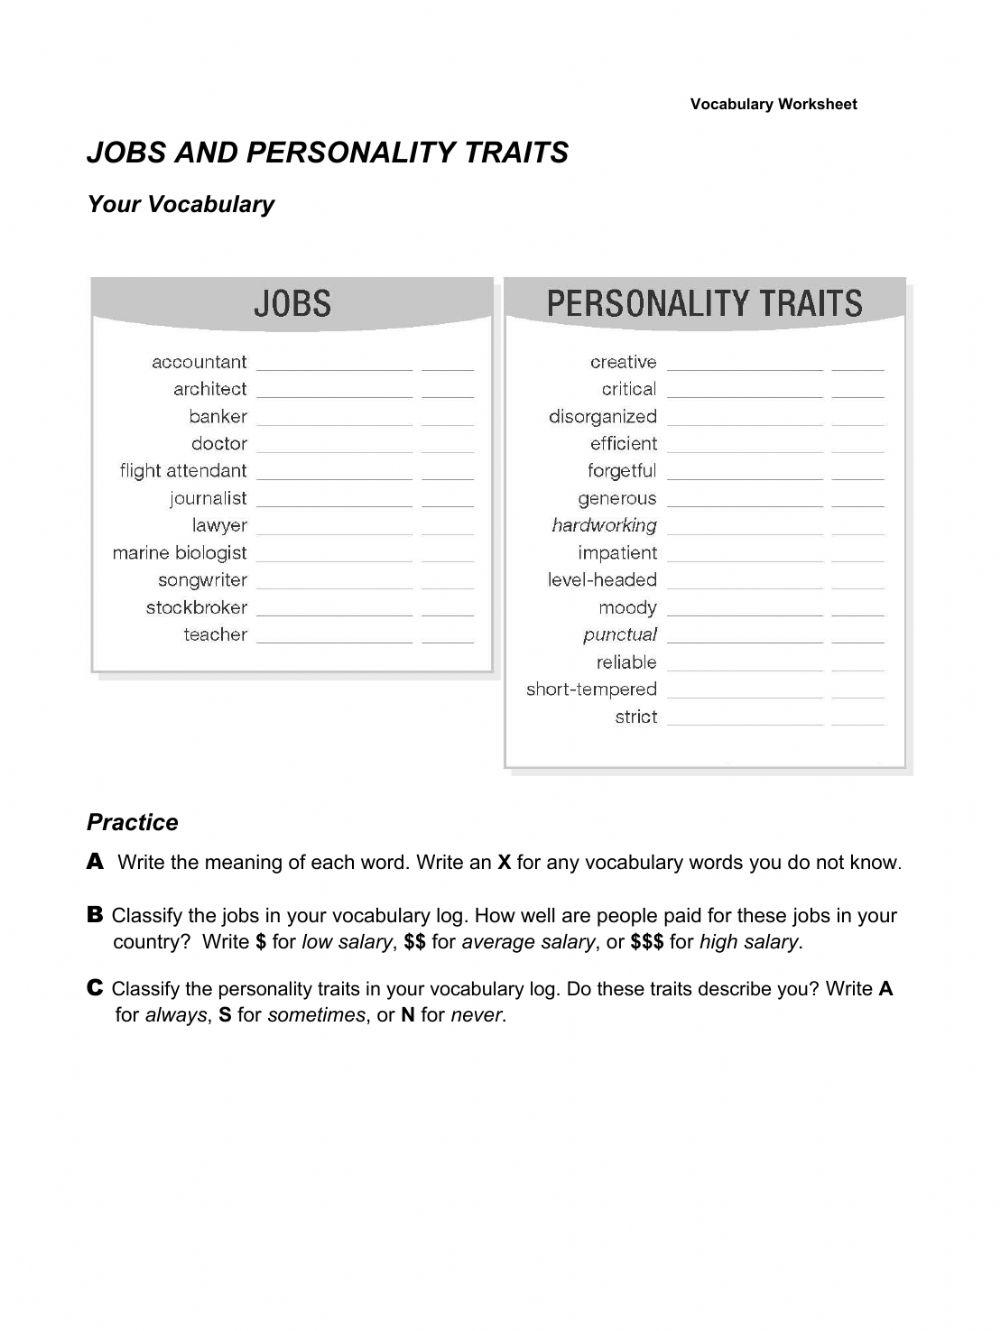 Job Titles and Personality Vocabulary